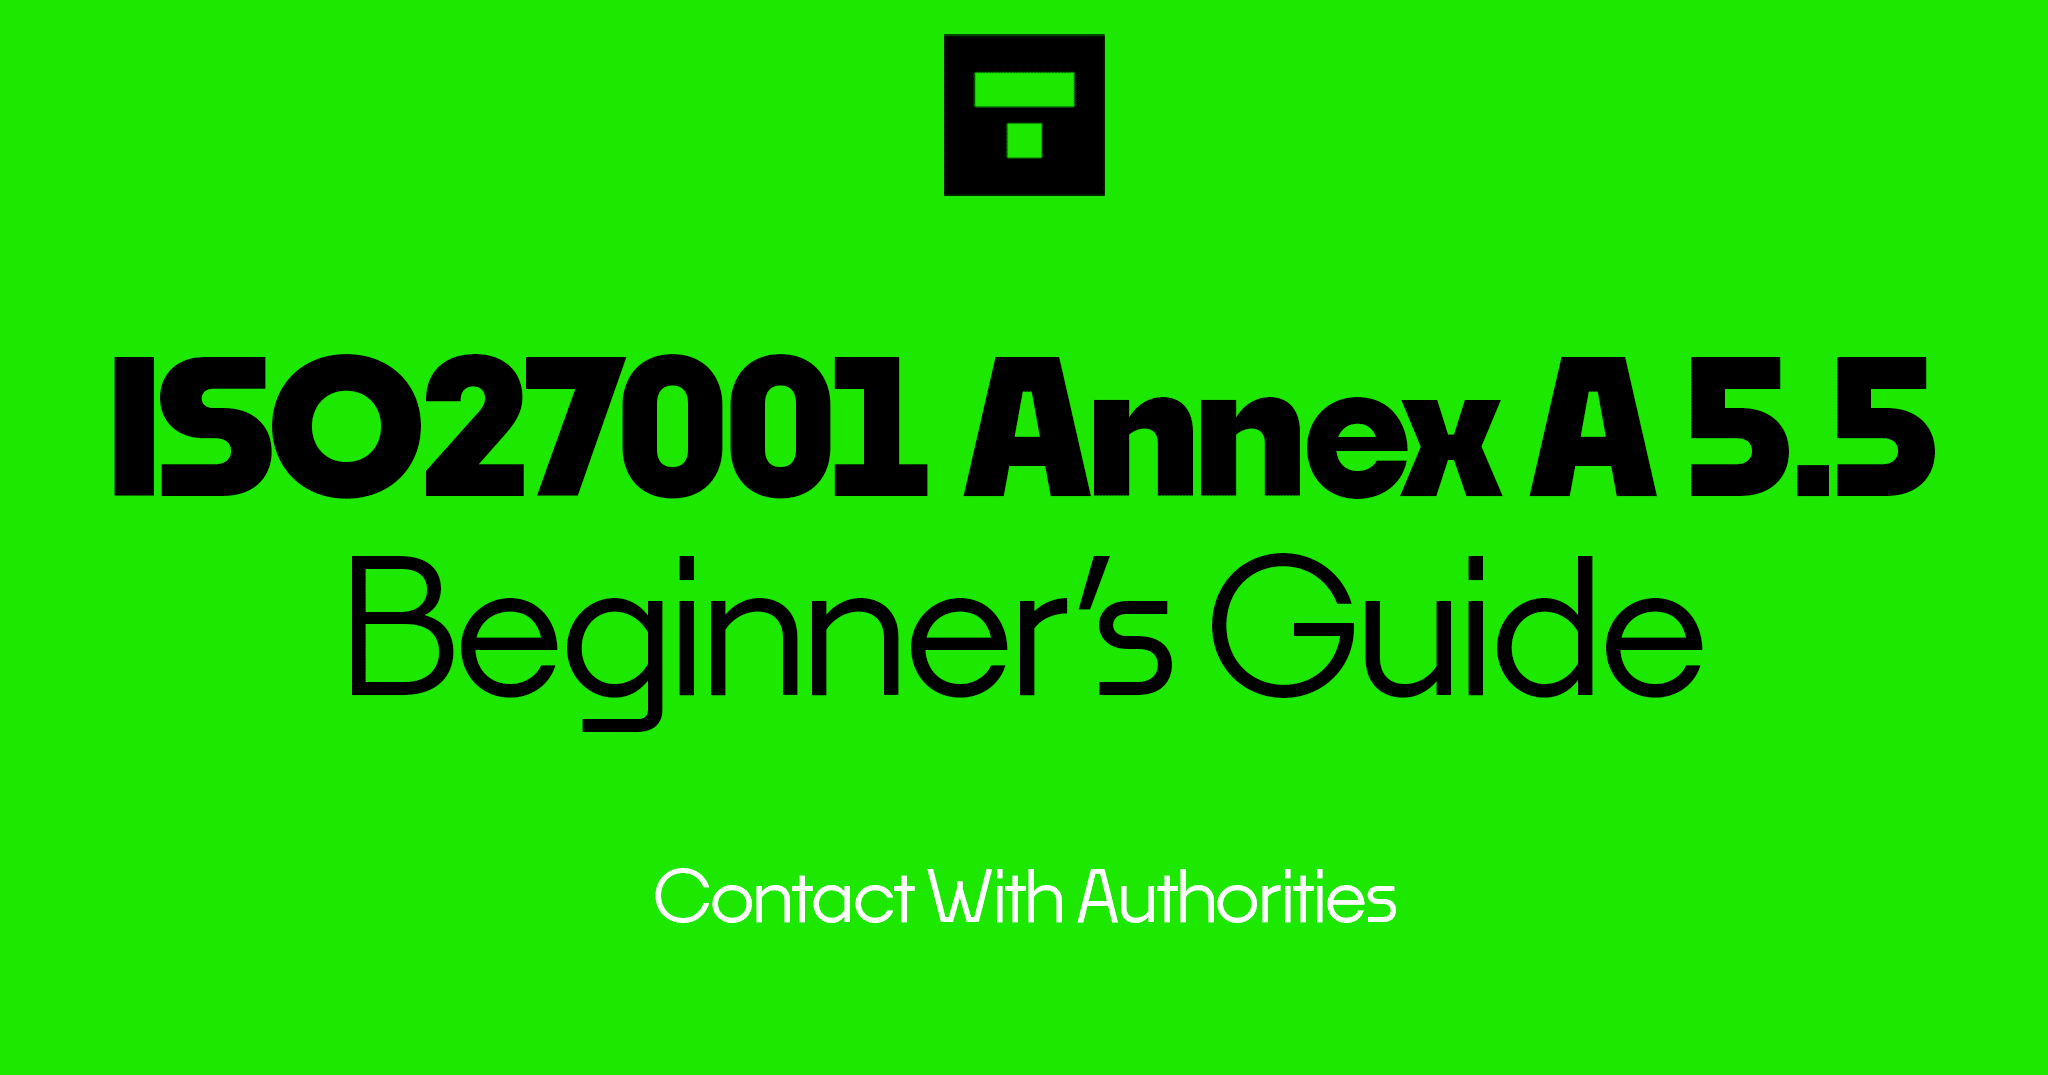 How To Implement ISO 27001 Annex A 5.5 Contact With Authorities